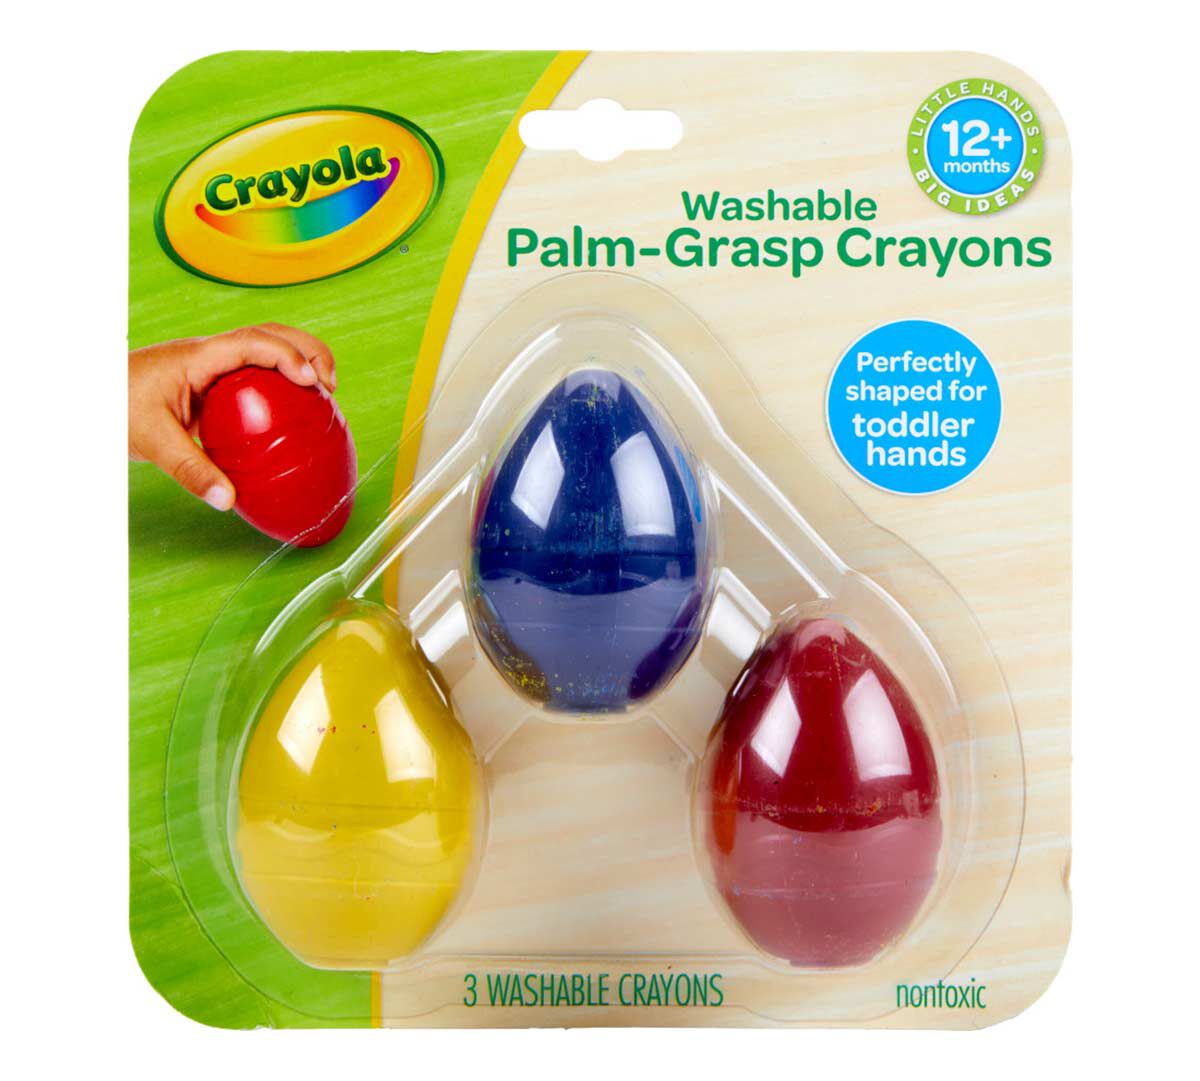 My First Washable Palm Grasp Crayons